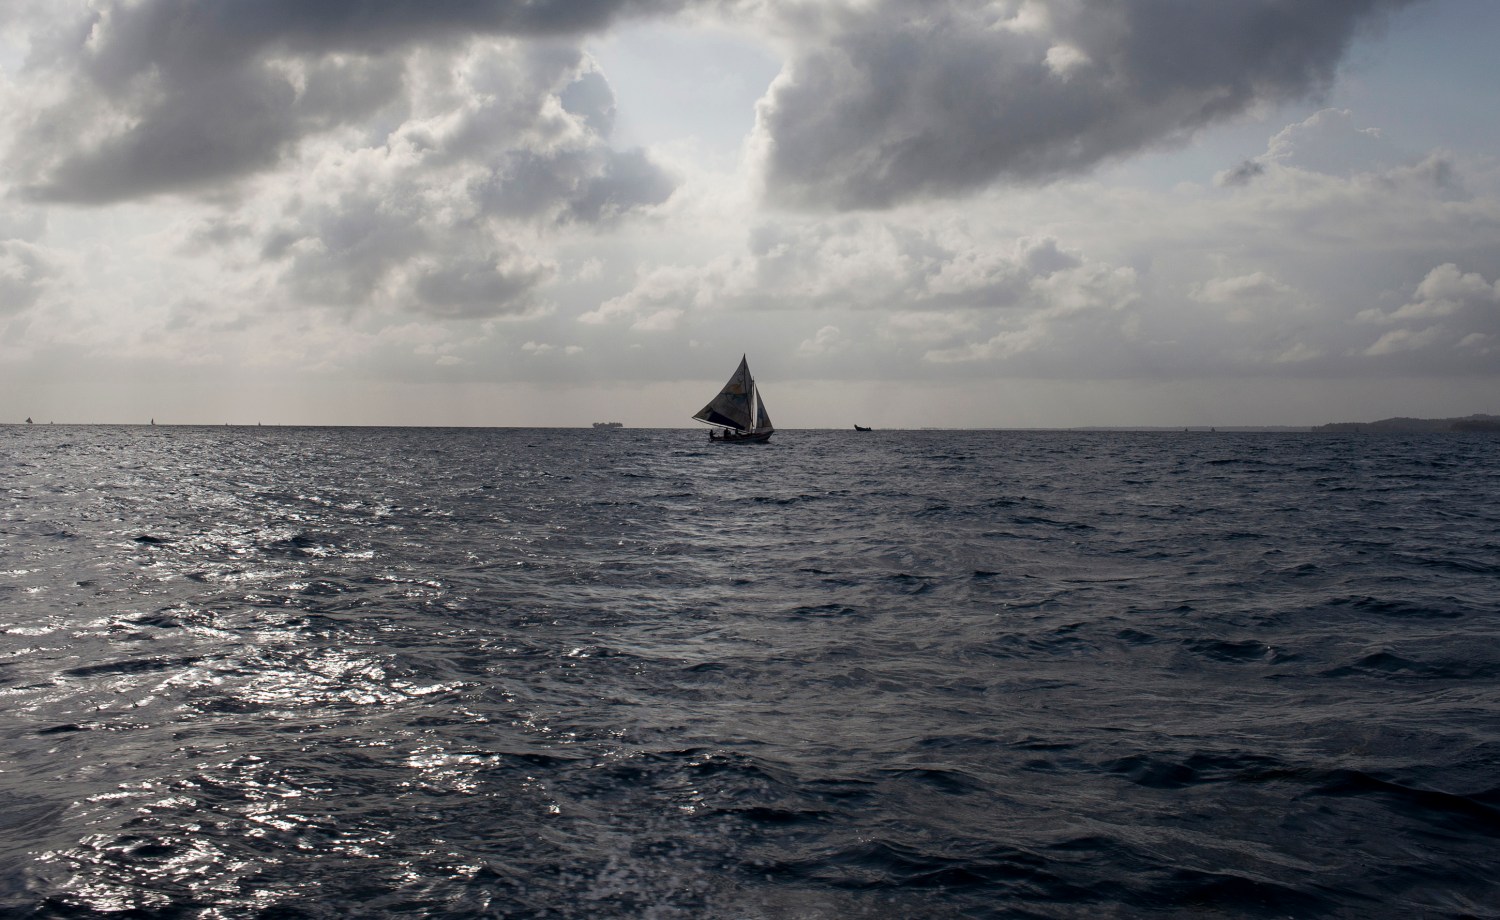 A sailboat navigates offshore of Ile-a-Vache island, off Haiti's south coast, March 25, 2014. For decades the mostly dirt-poor residents of the small island of Ile-a-Vache off Haiti's south coast lived in anonymity, until last year when the government claimed the 20-square-mile former pirate lair as a "public utility," potentially stripping the 14,000 residents of their land to develop a high-end tourist resort. Picture taken March 25, 2014.   REUTERS/stringer (HAITI - Tags: TRAVEL POLITICS SOCIETY BUSINESS) - GM1EA4616KT01